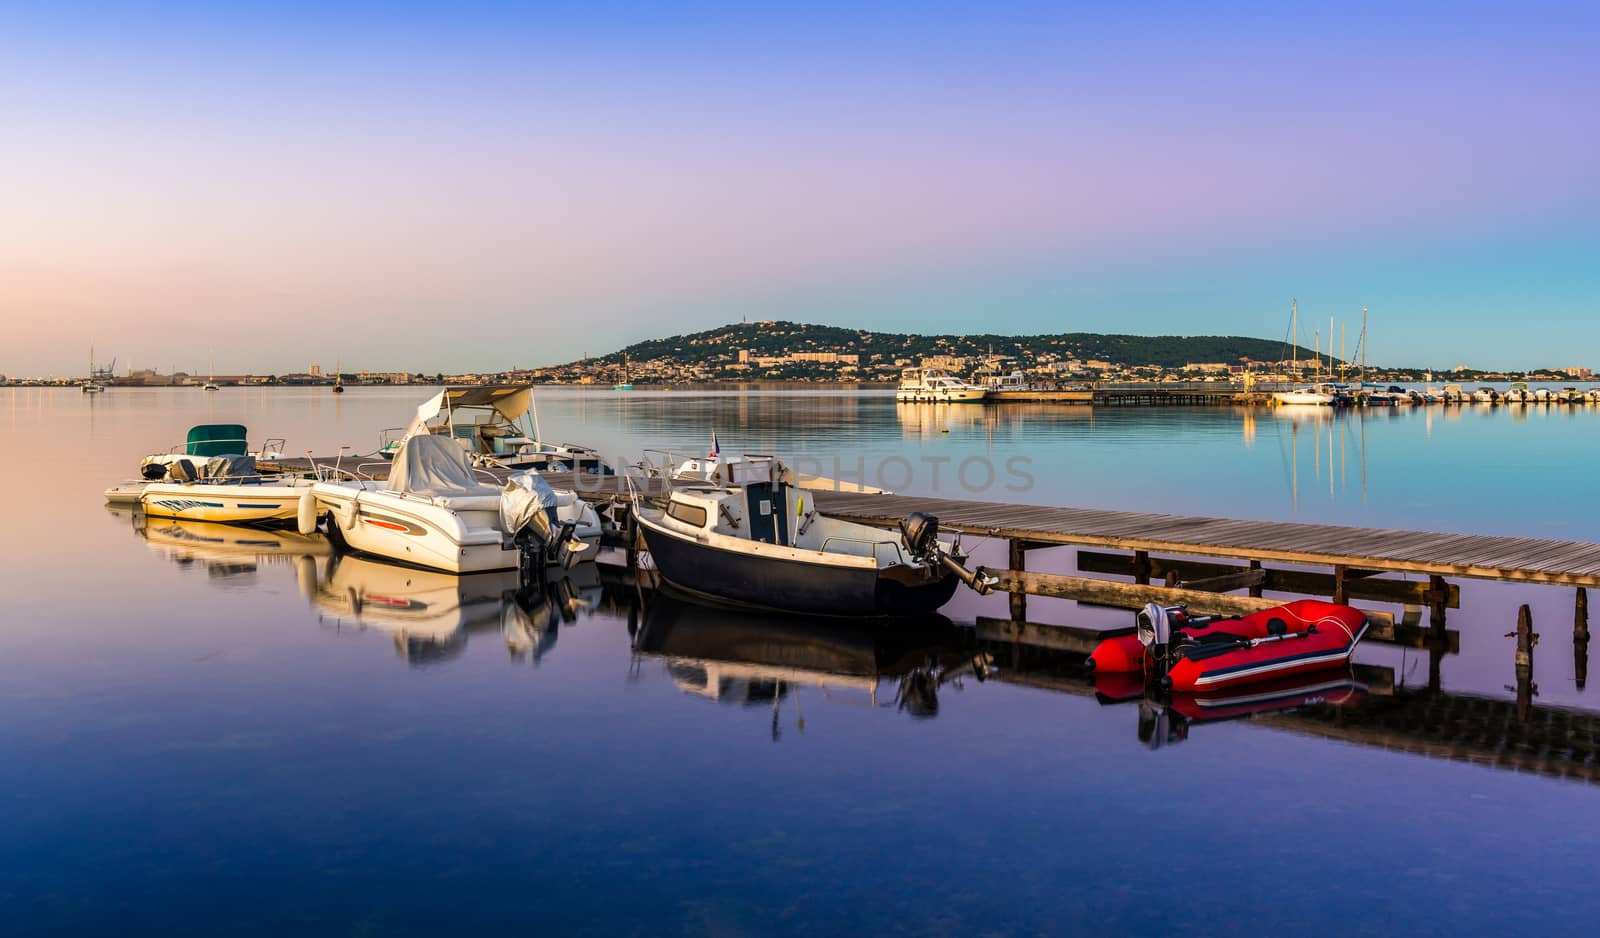 Pontoon with boats in Balaruc-les-Bains, on the Etang de Thau, and Sète in the background. by Frederic